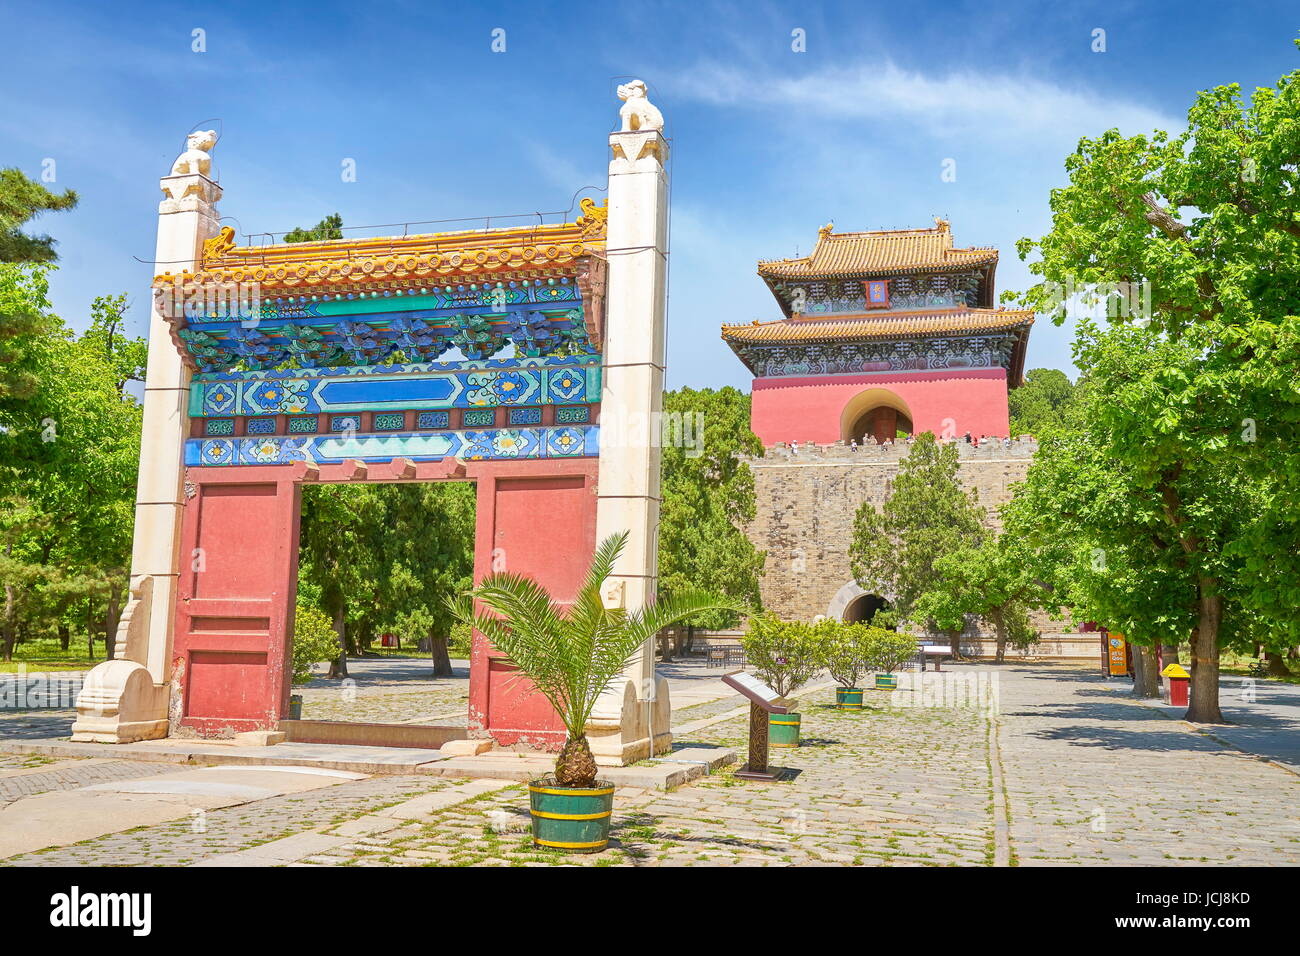 Ingresso a Changling delle tombe Ming, Pechino, Cina Foto Stock